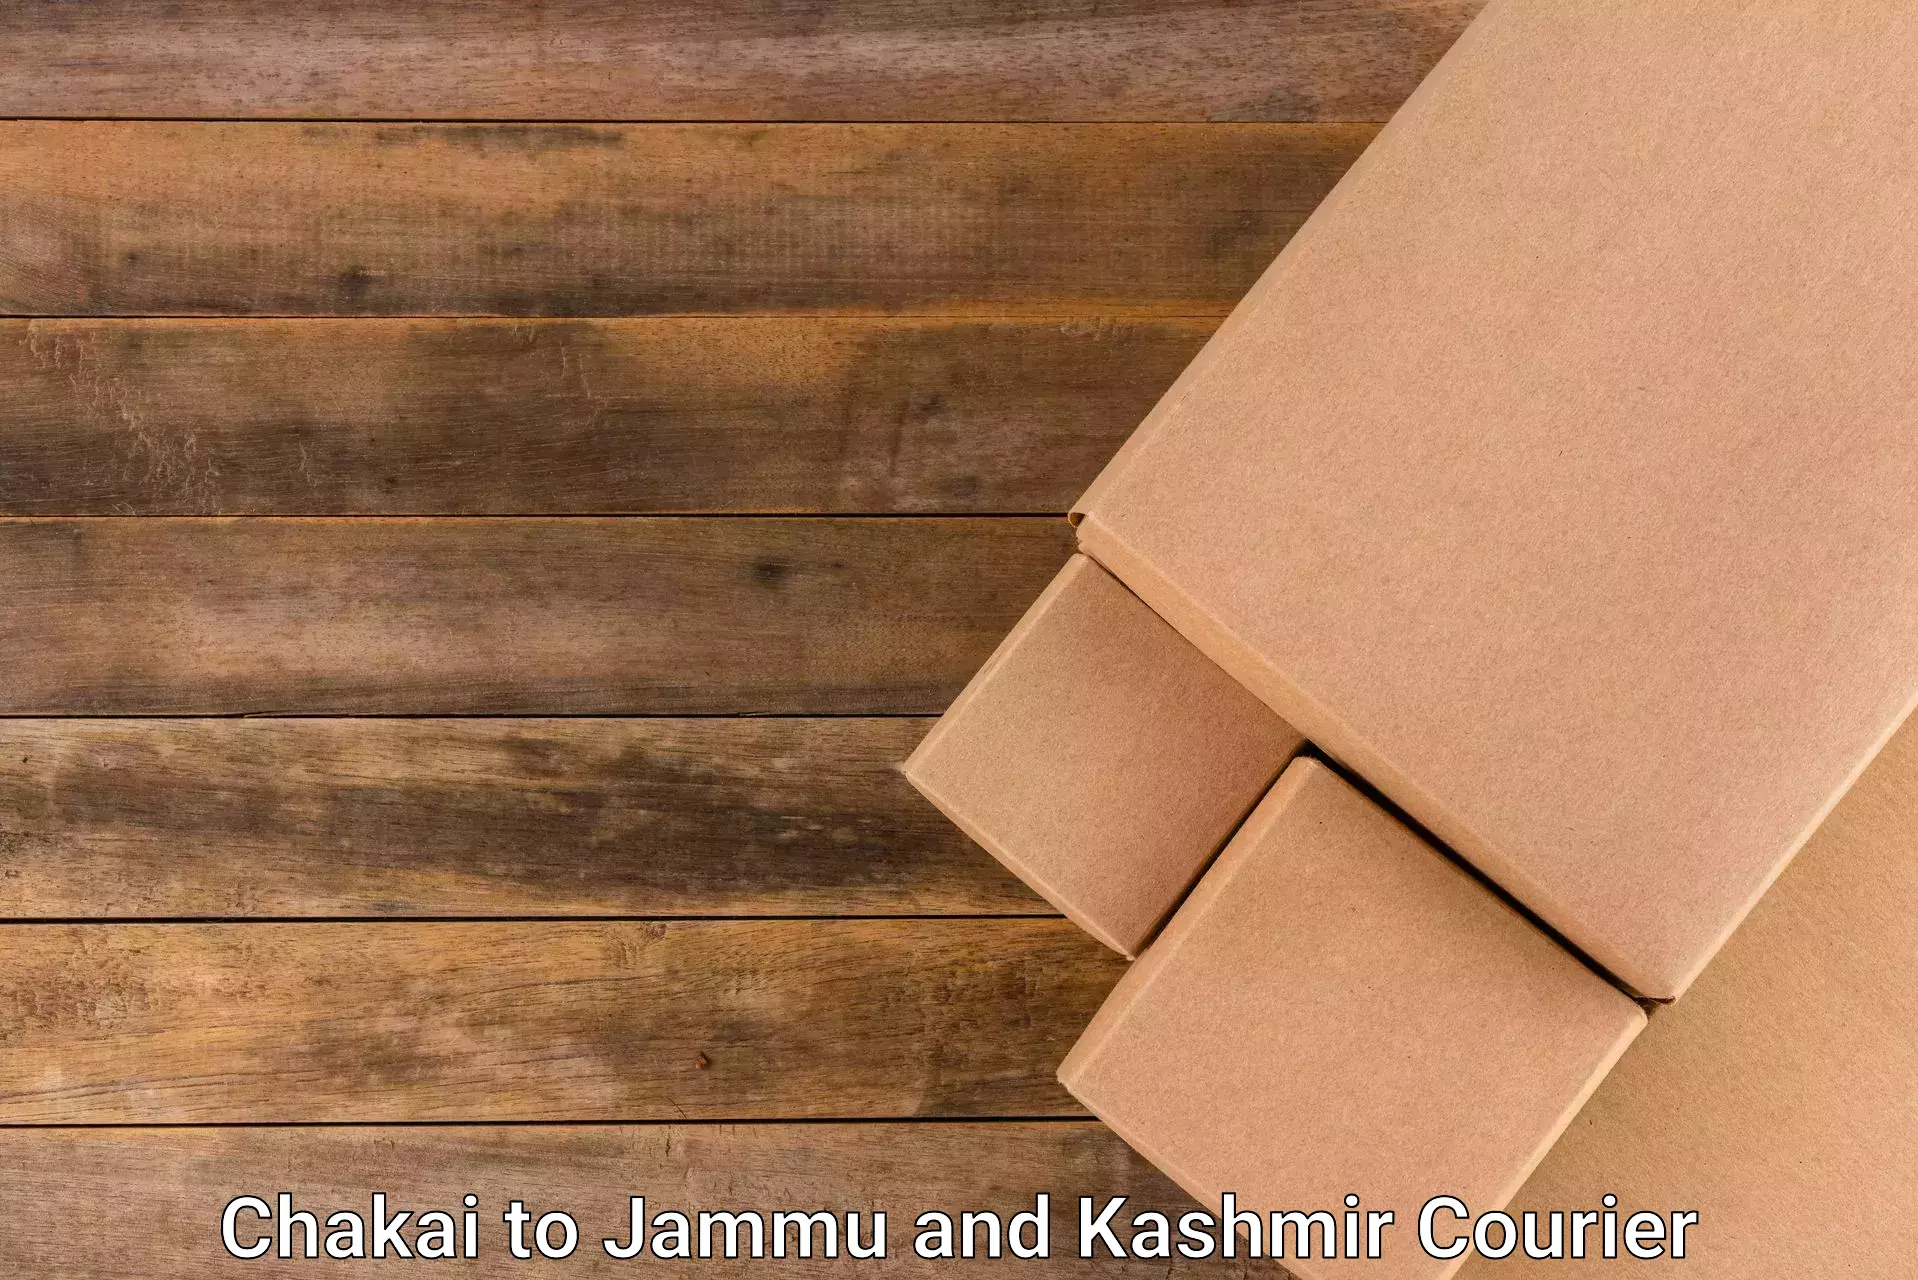 On-call courier service Chakai to Baramulla